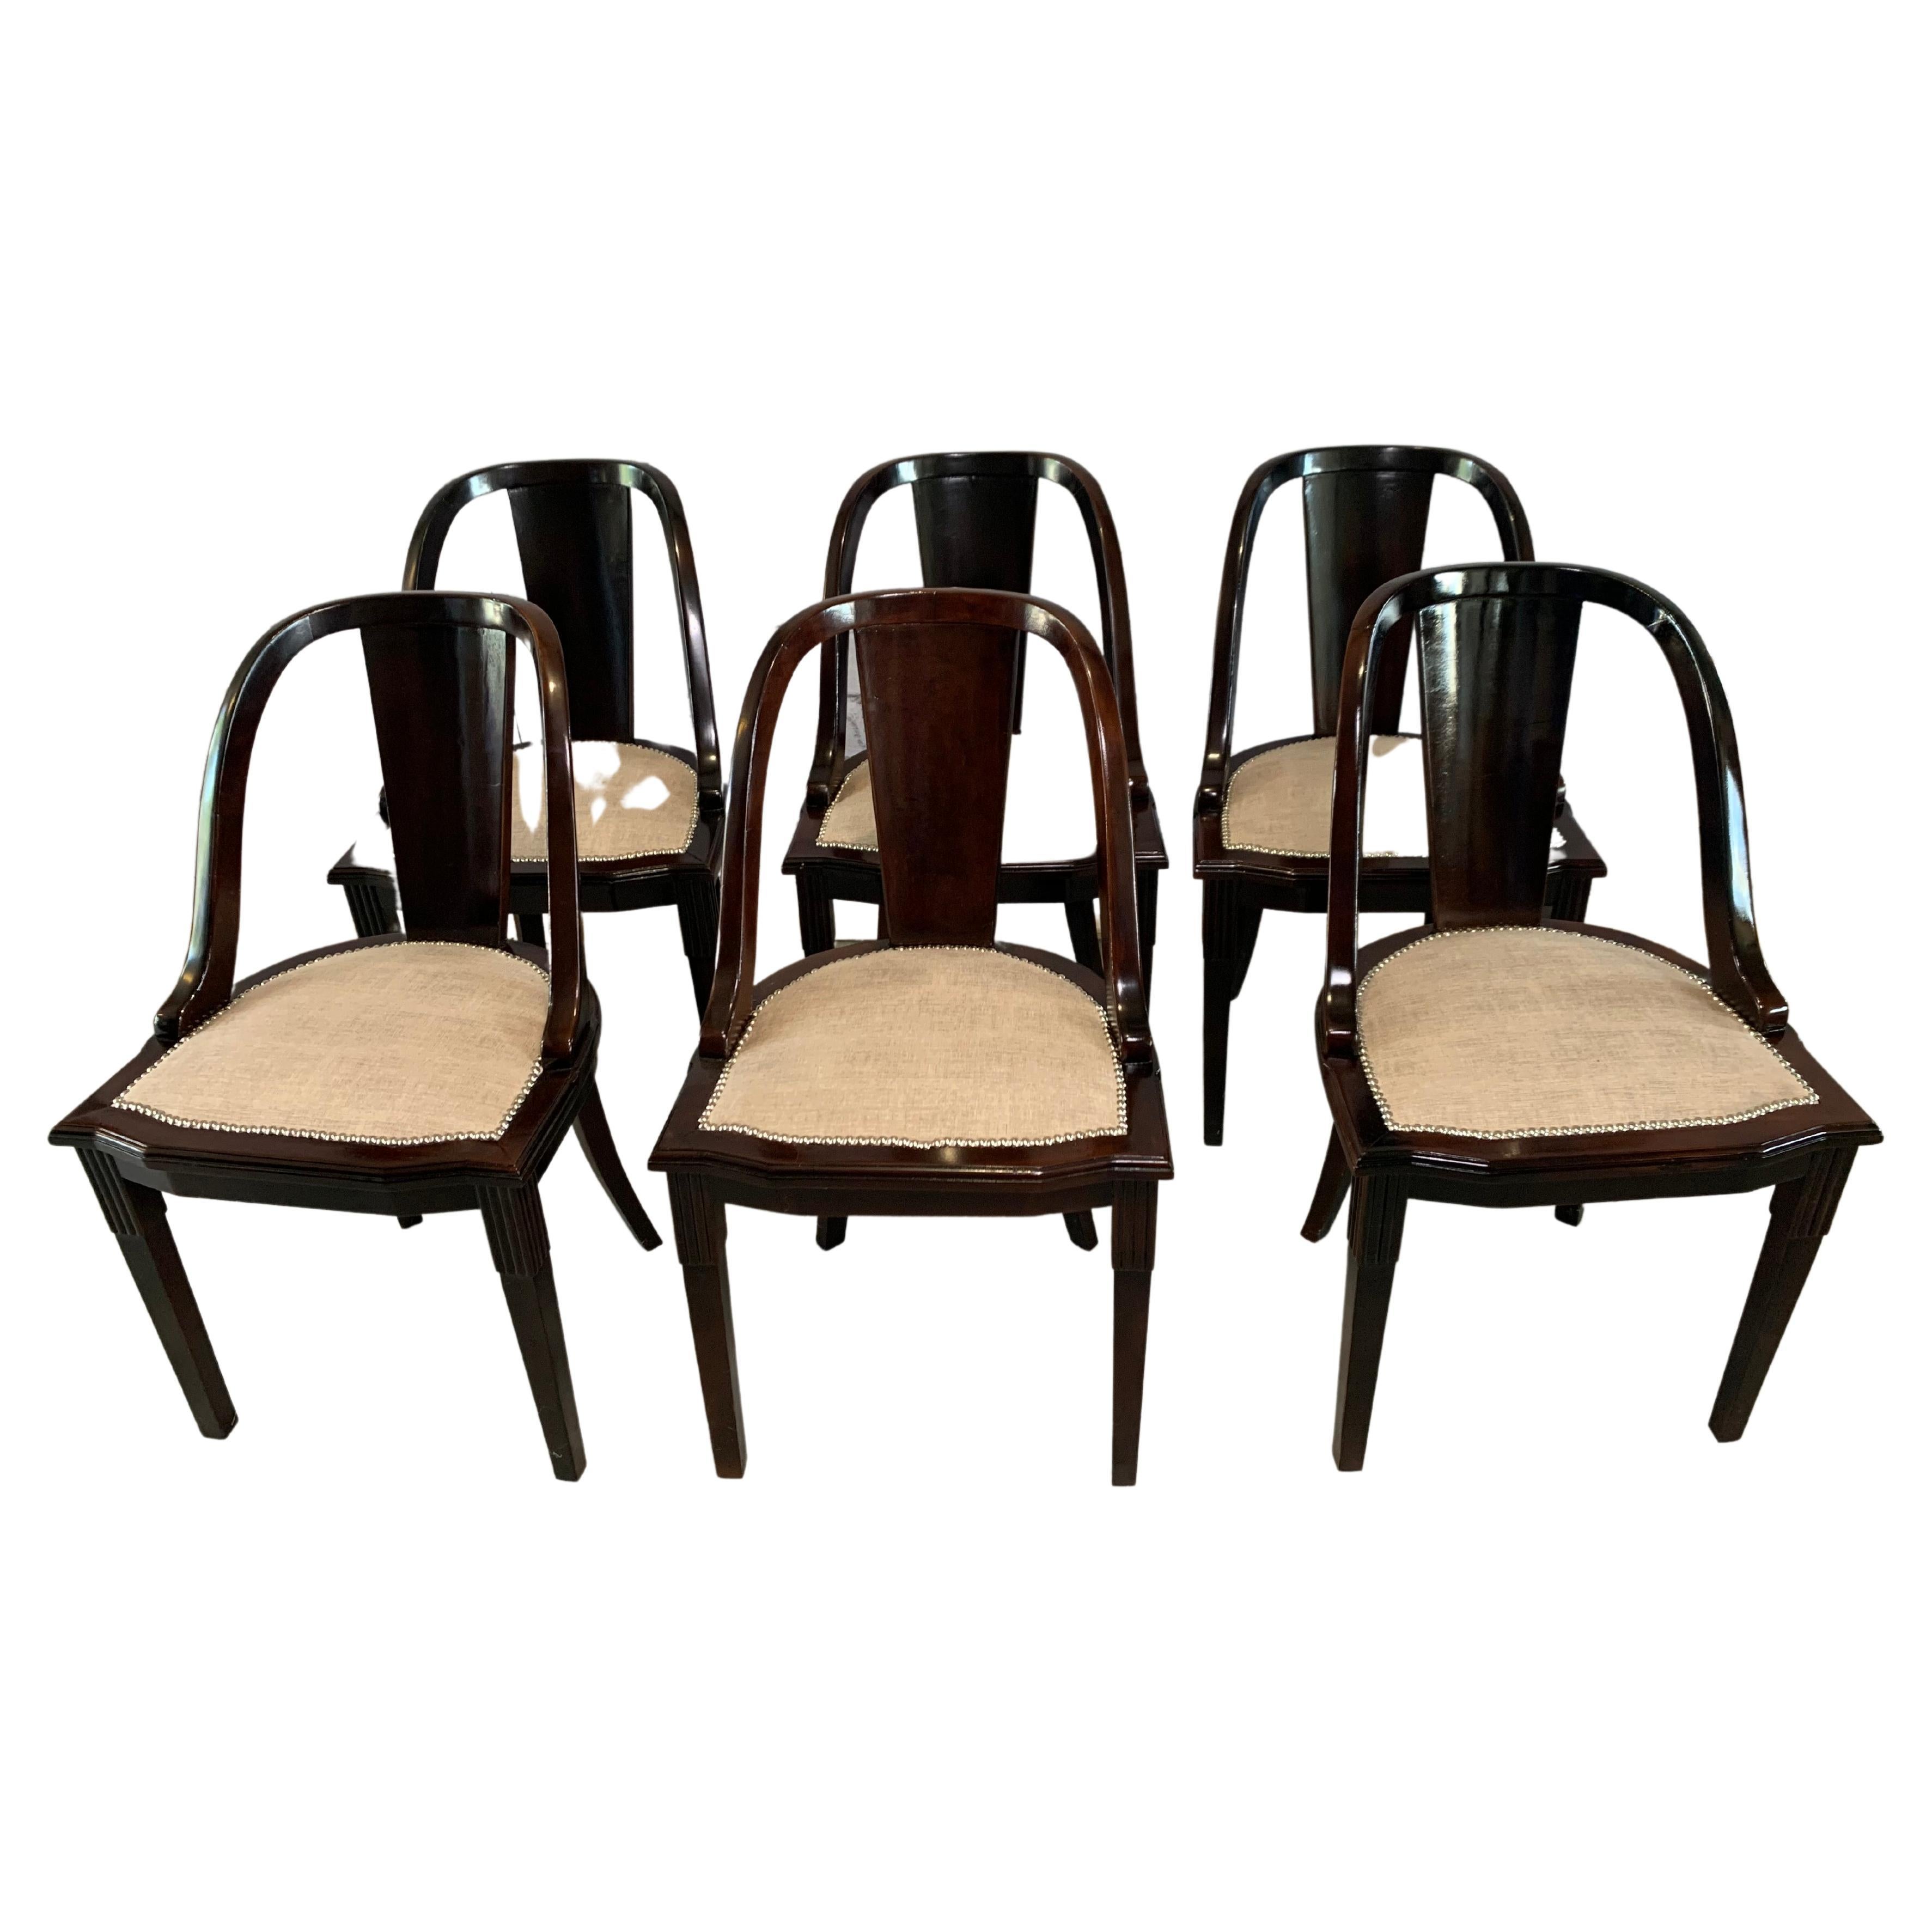 Set of 6 French Art Deco “Gondola” Dining Chairs 1930s